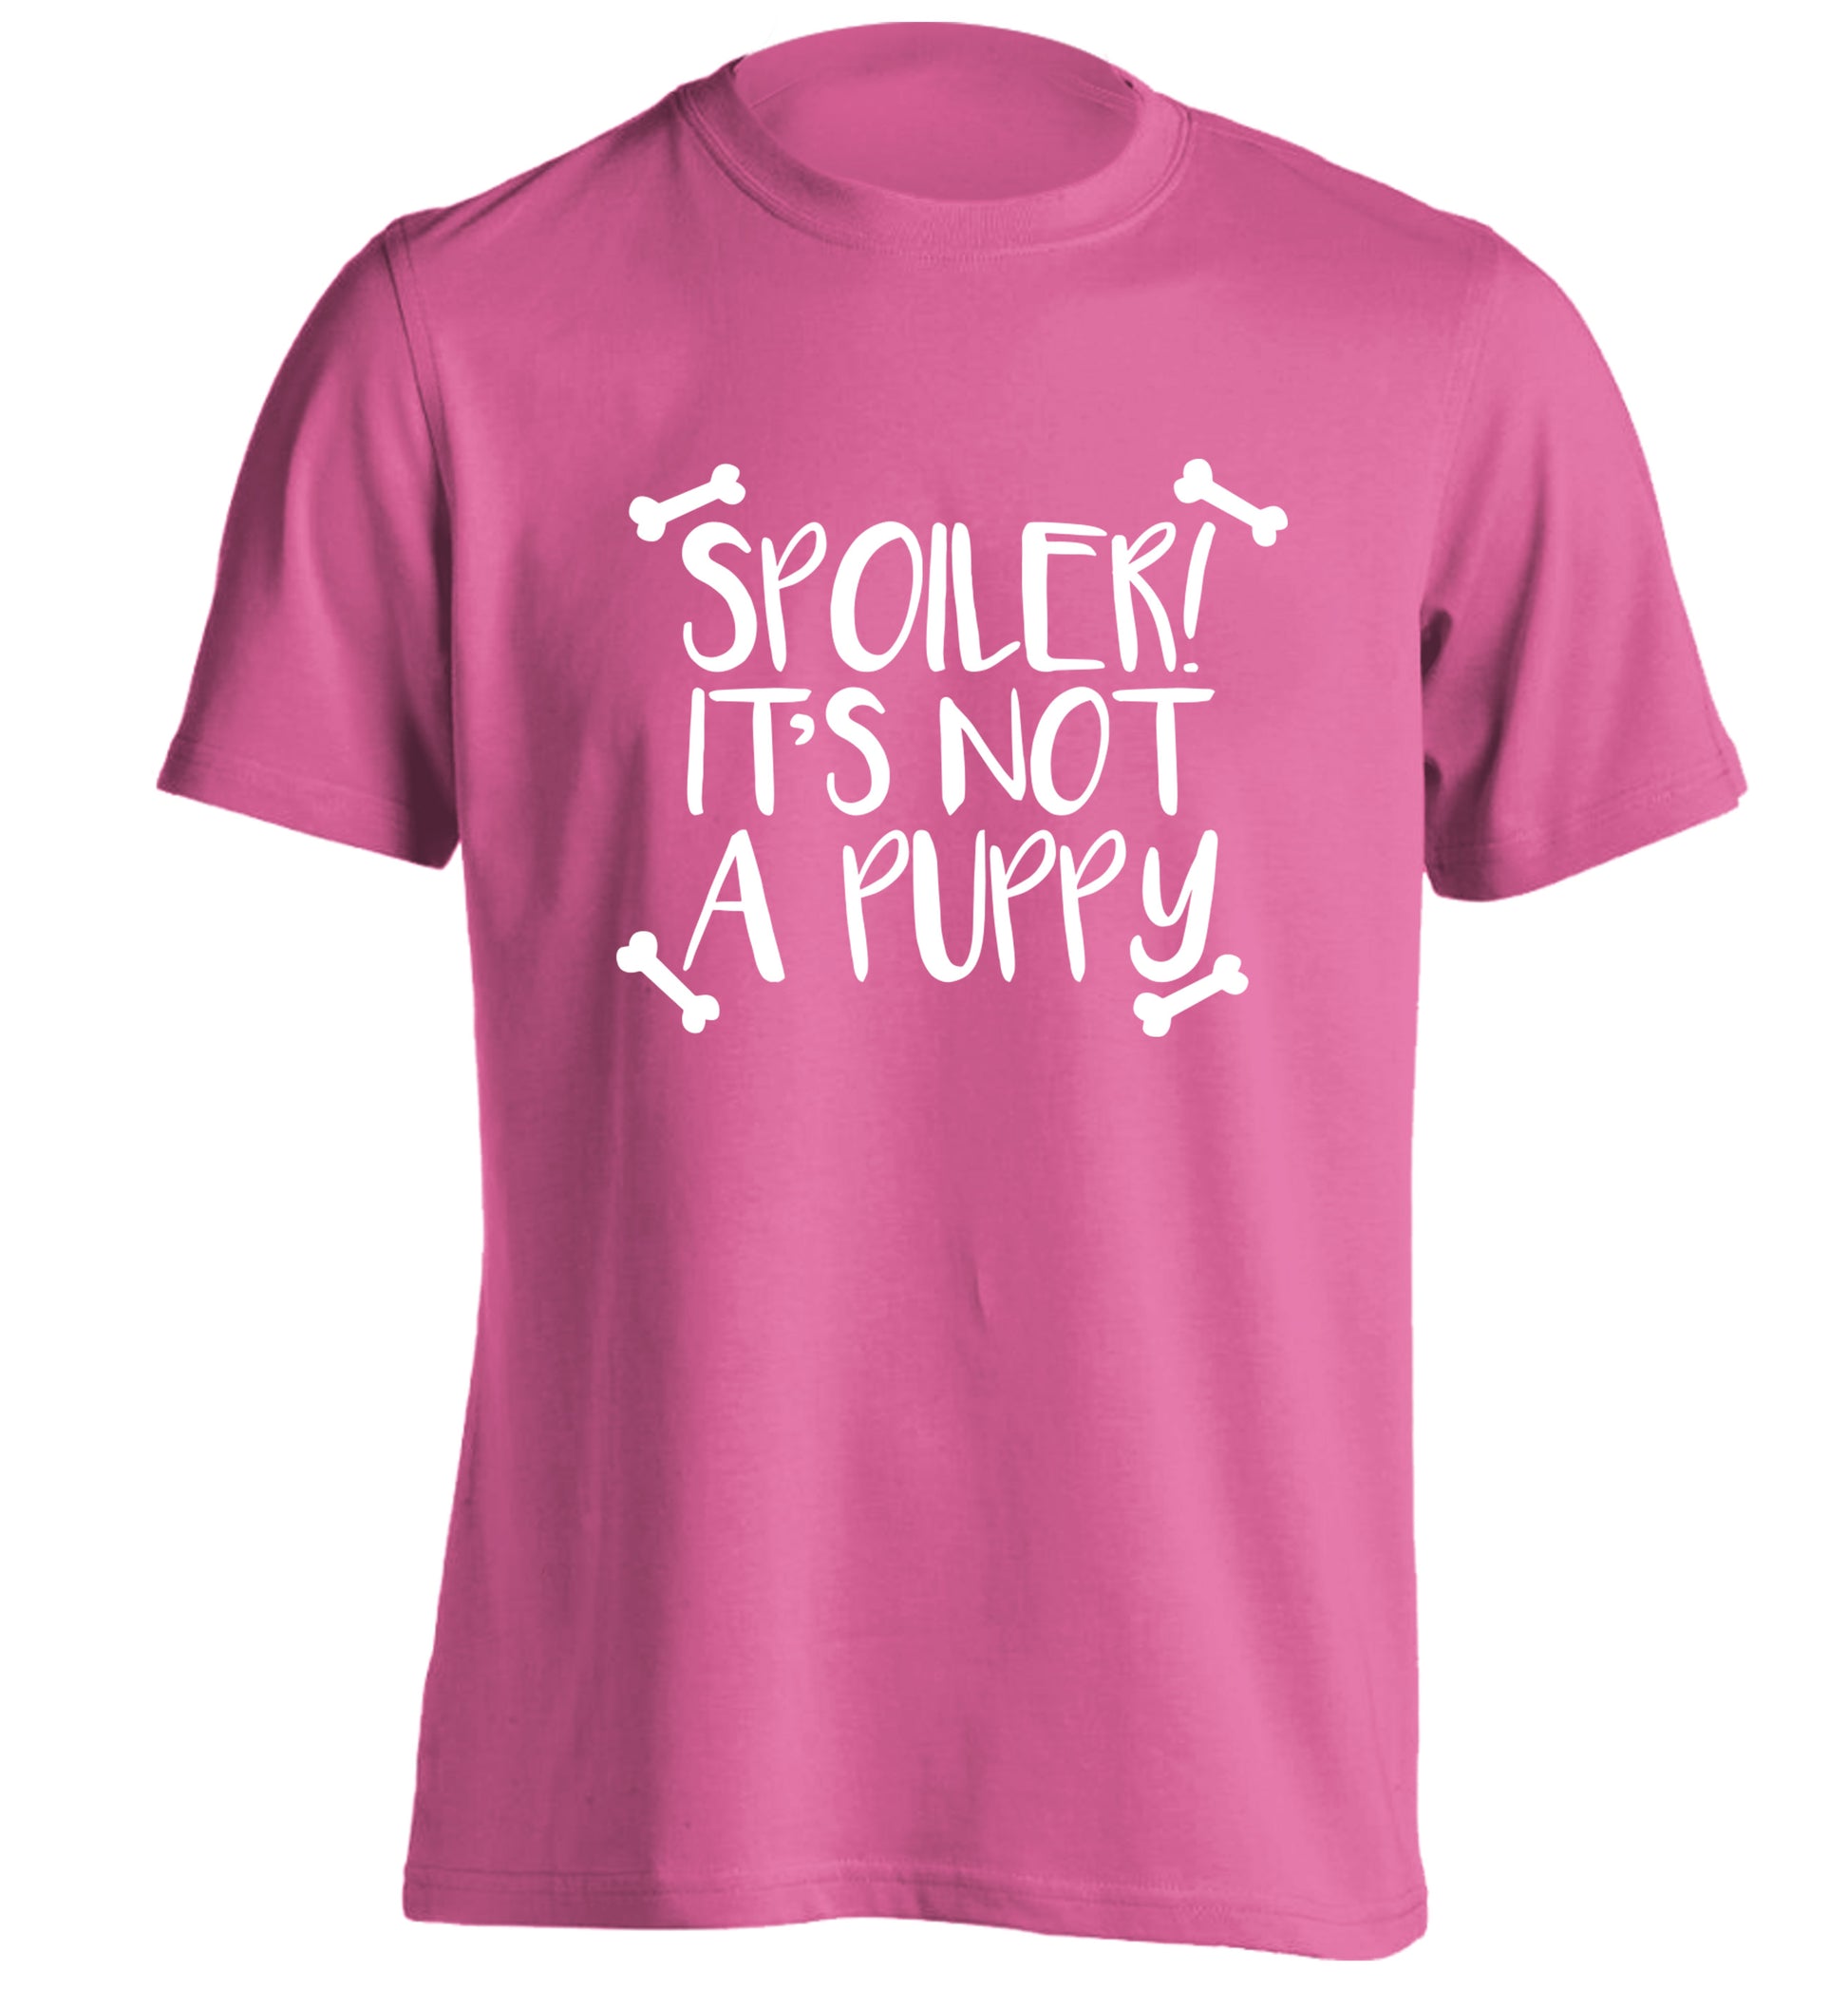 Spoiler it's not a puppy adults unisex pink Tshirt 2XL